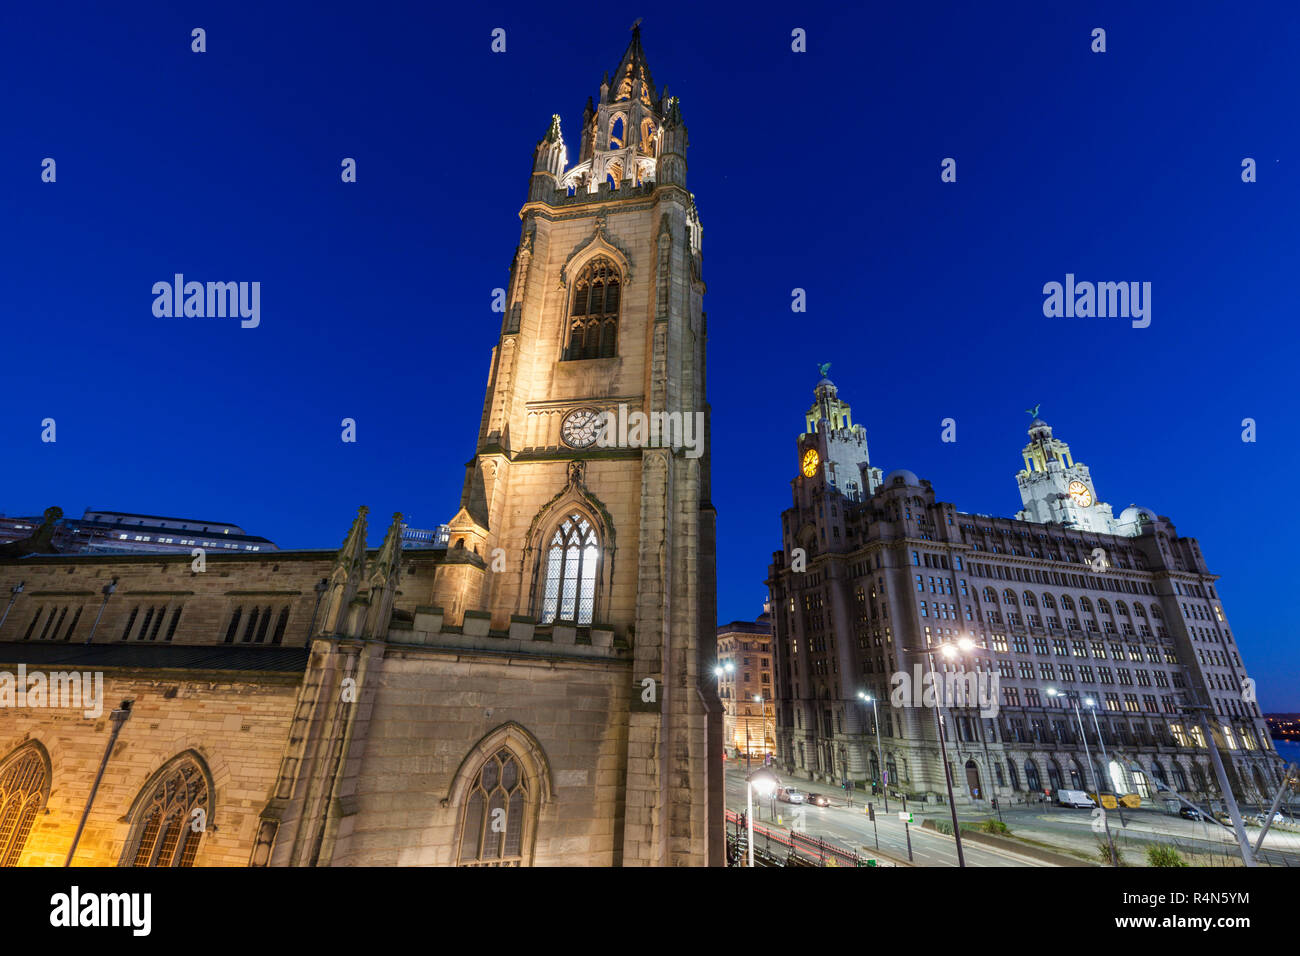 Our Lady and St Nicholas Church in Liverpool, England Stock Photo